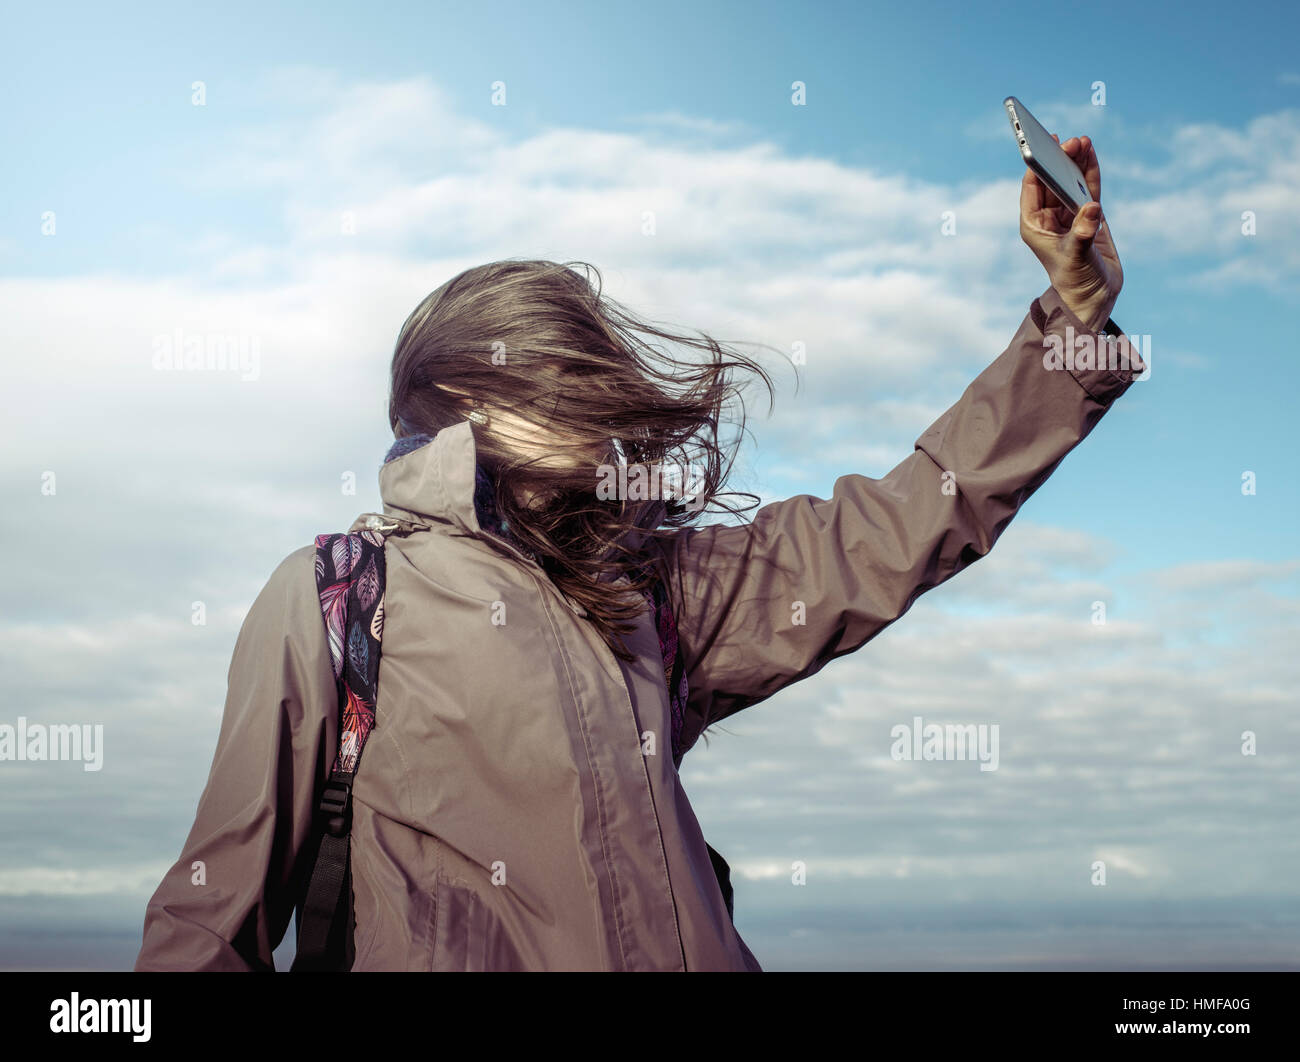 A woman trying to take a selfie on a windy day Stock Photo